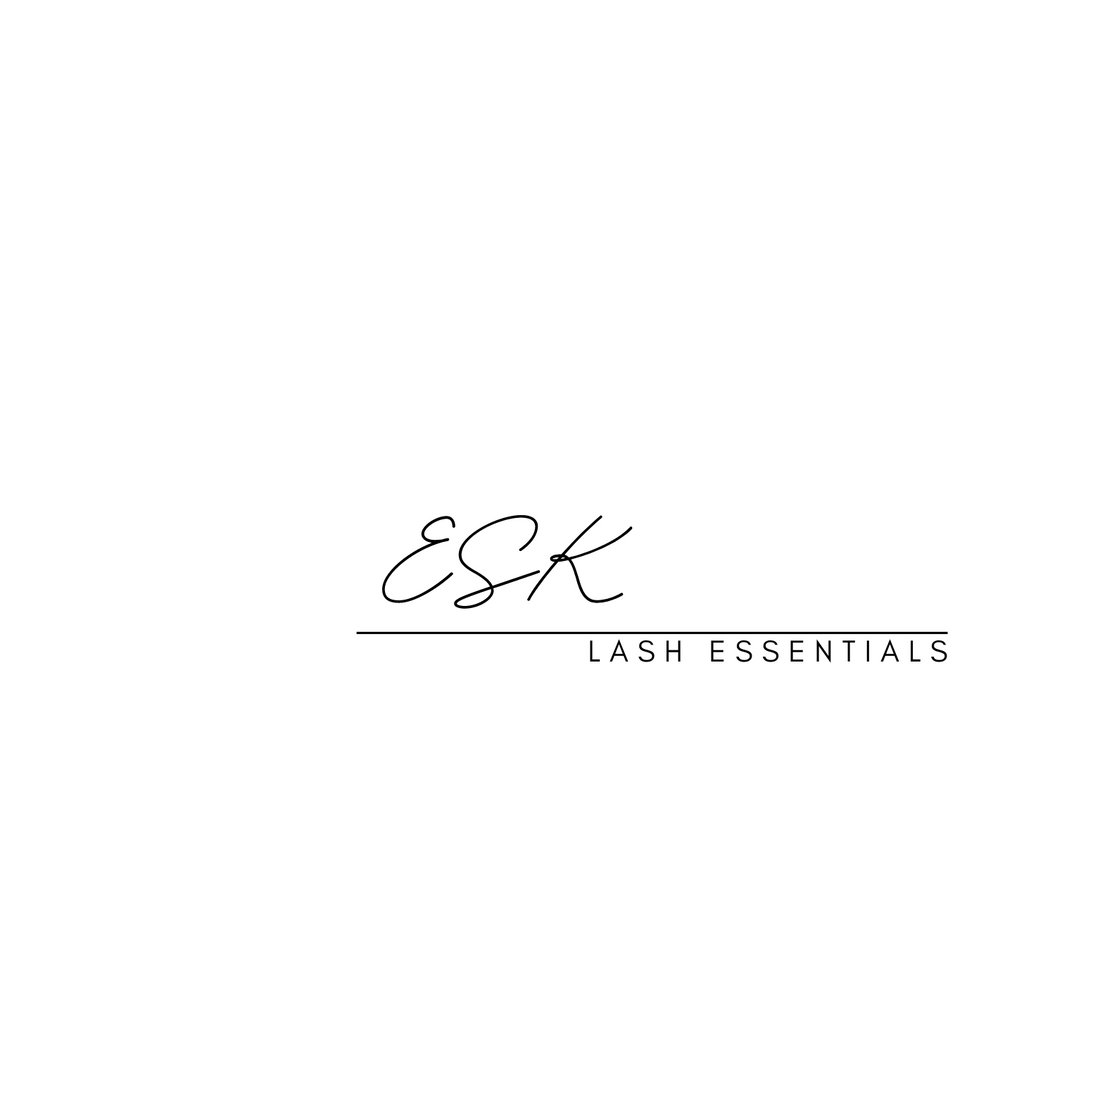 ESK Lash Supplies Toolbox ESK eyelash extension products and supplies 8/11/23 3:53pm